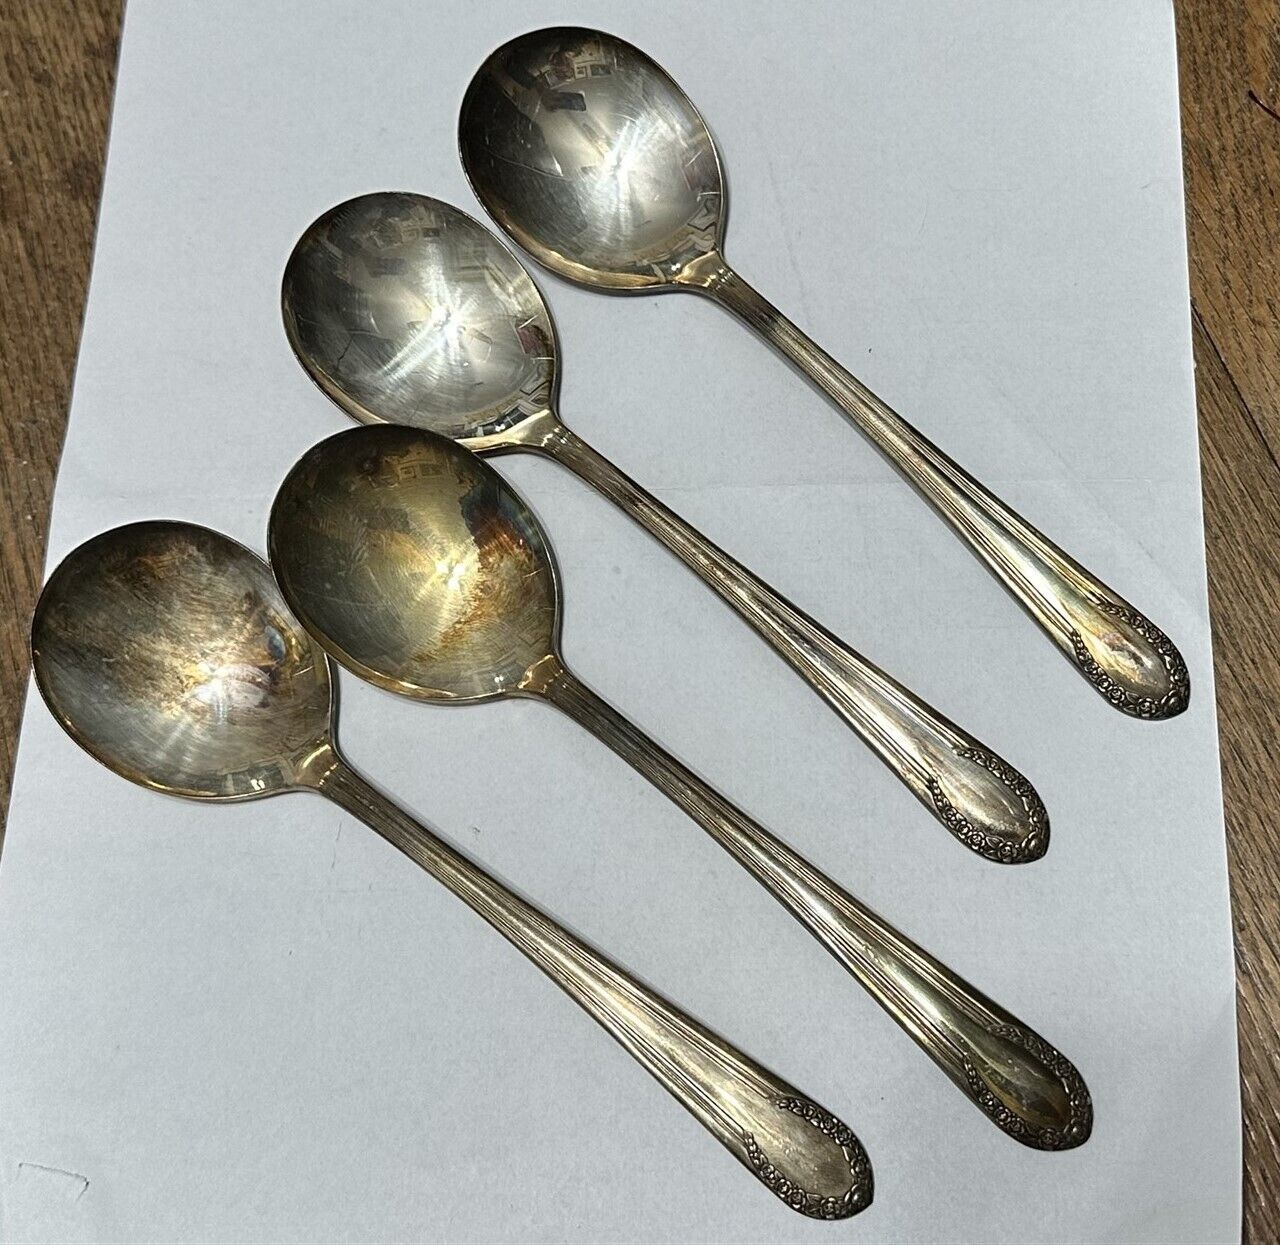  Oval Soup Spoons Wm Rogers Silverplate Extra Plate Original Rogers Set of 4